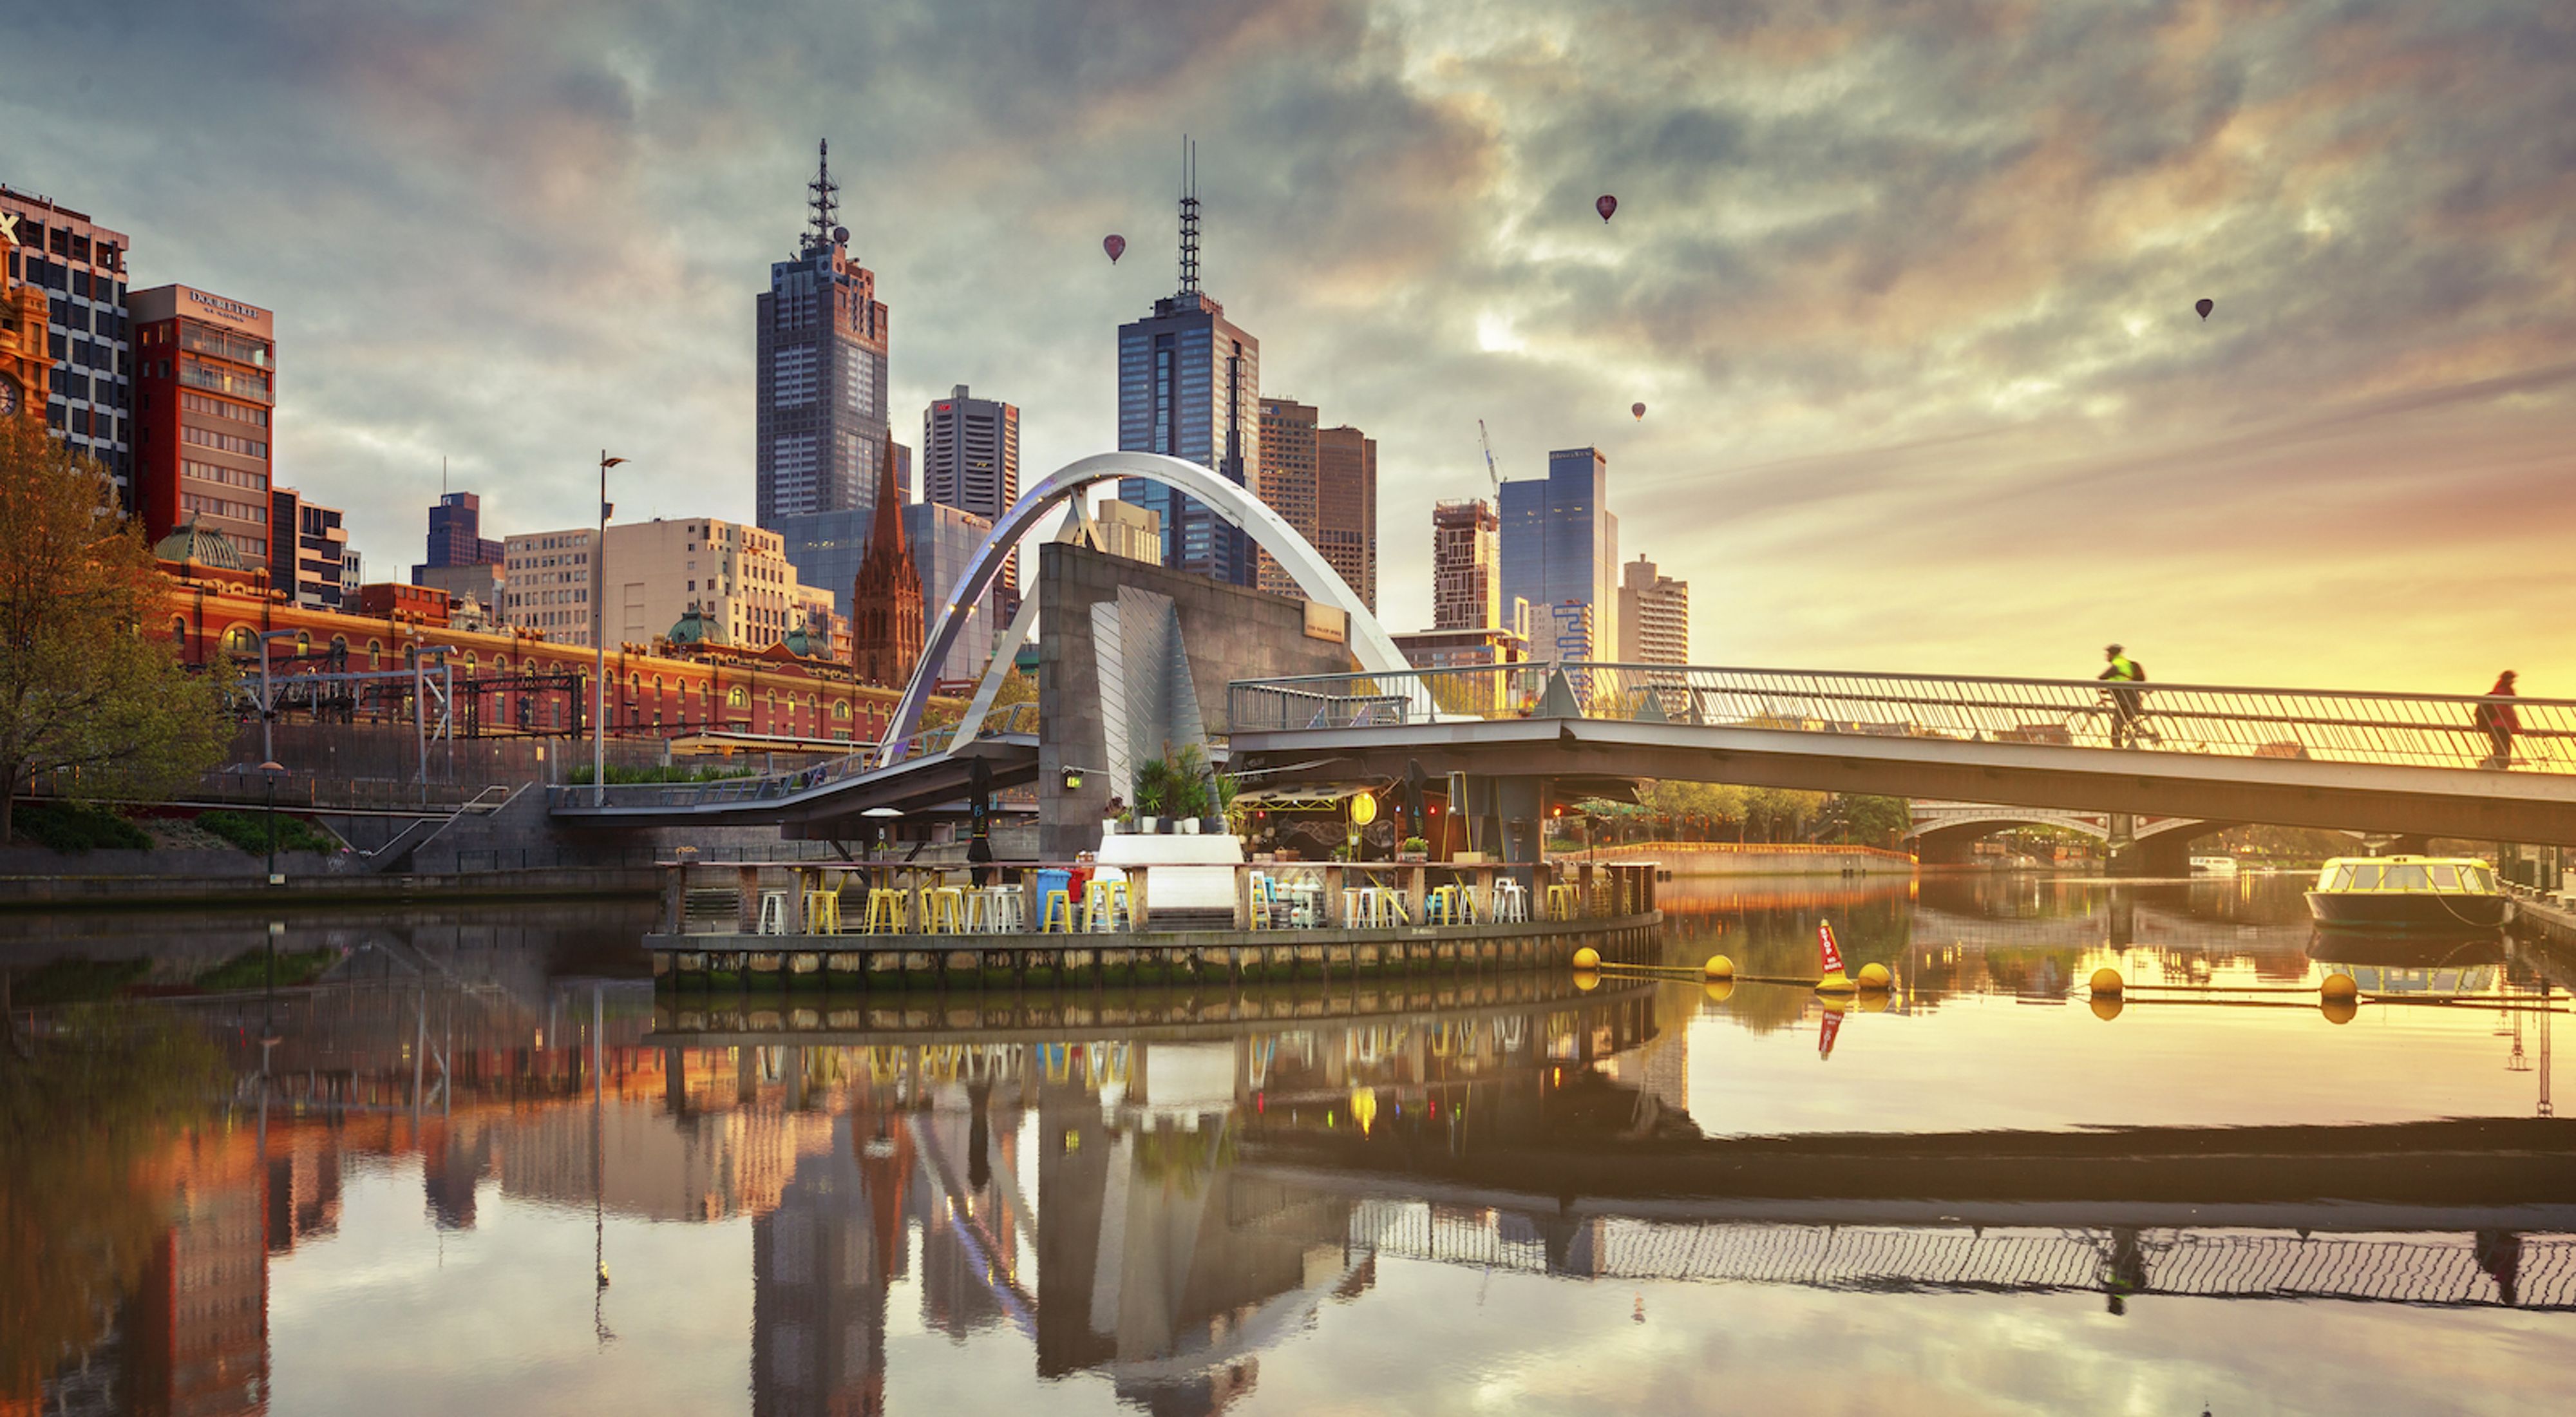 Melbourne is part of the 100 Resilient Cities initiative pioneered by the Rockefeller Foundation